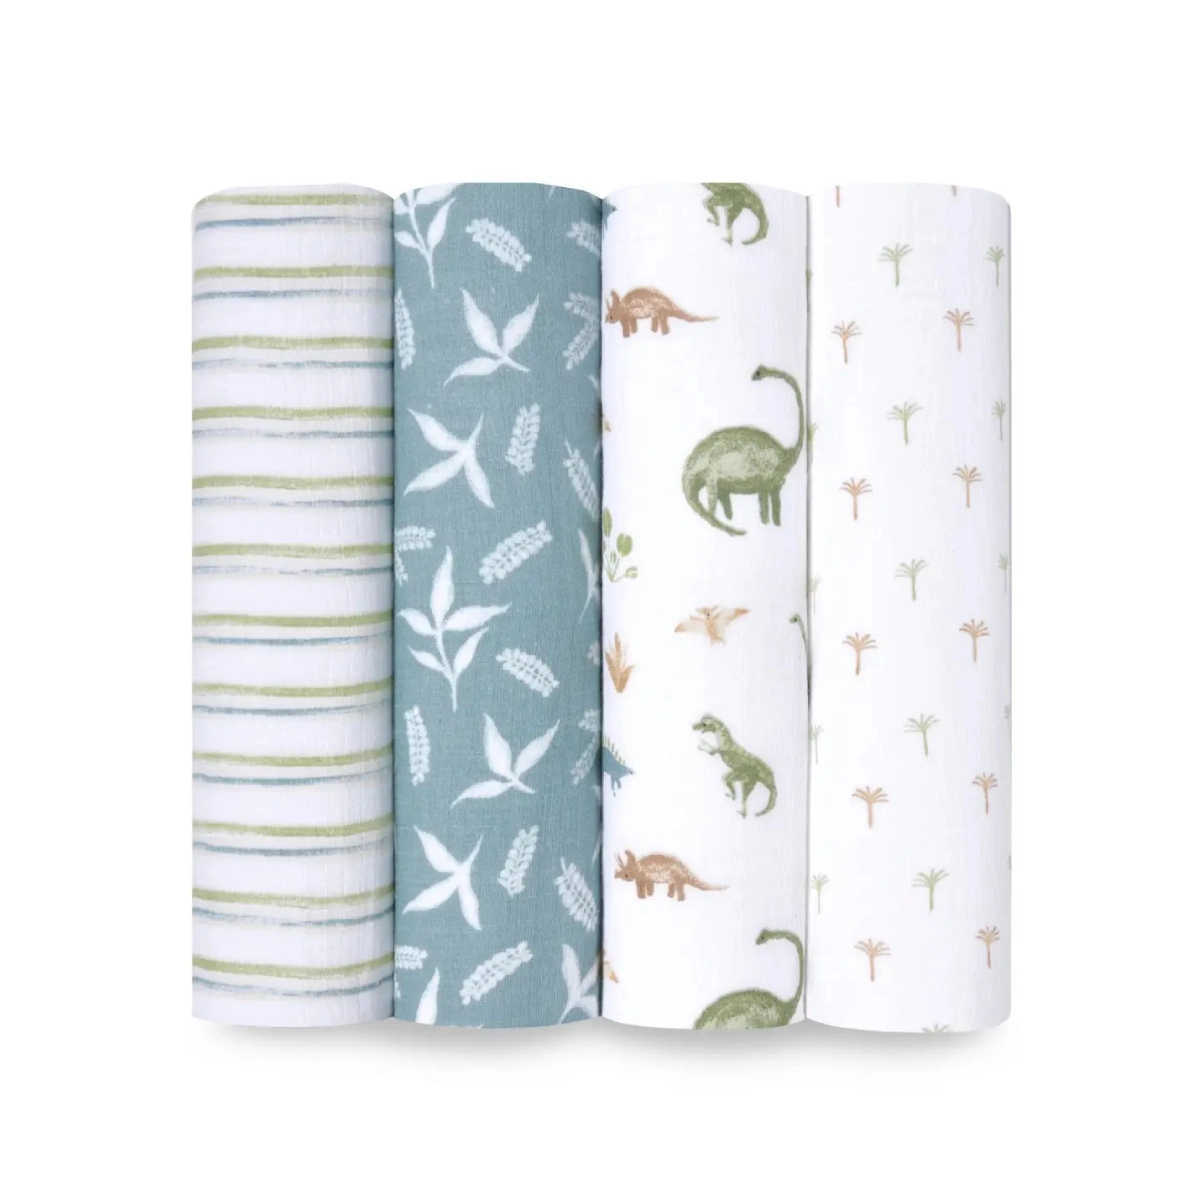 Image of Aden + Anais Pack of 4 Essentials Cotton Muslin Swaddle Blanket - Dino Jungle (23-19-252)